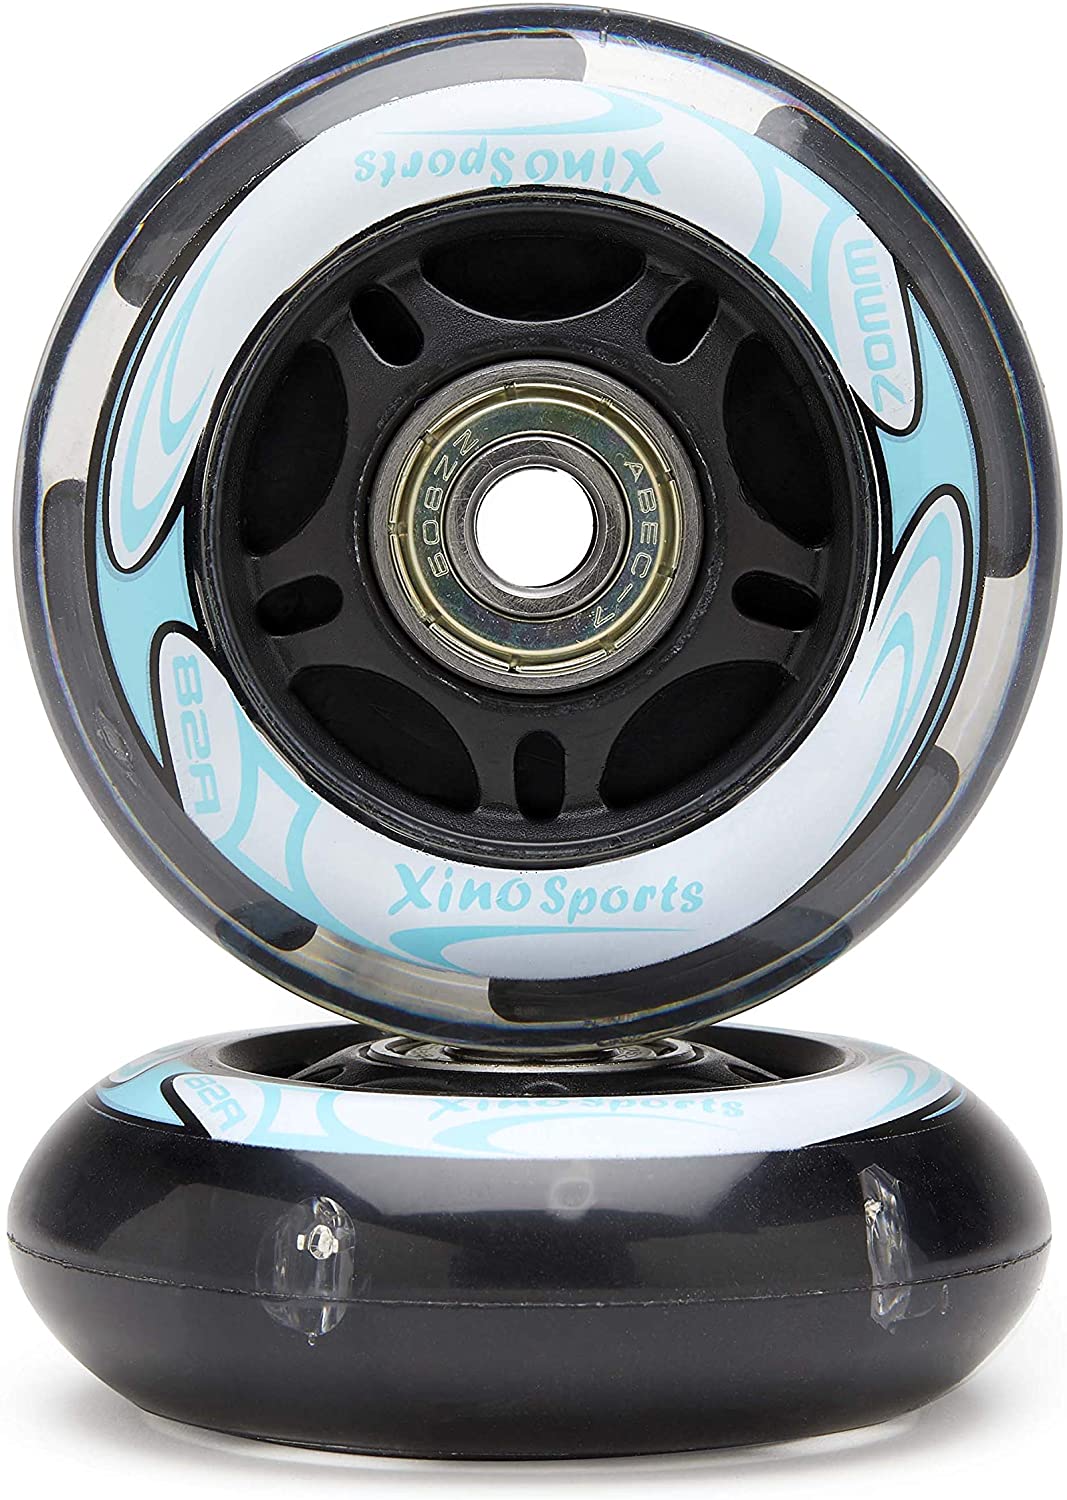 Pack of 2 (Aqua) Roller Blade Replacement Wheels - Xino Sports